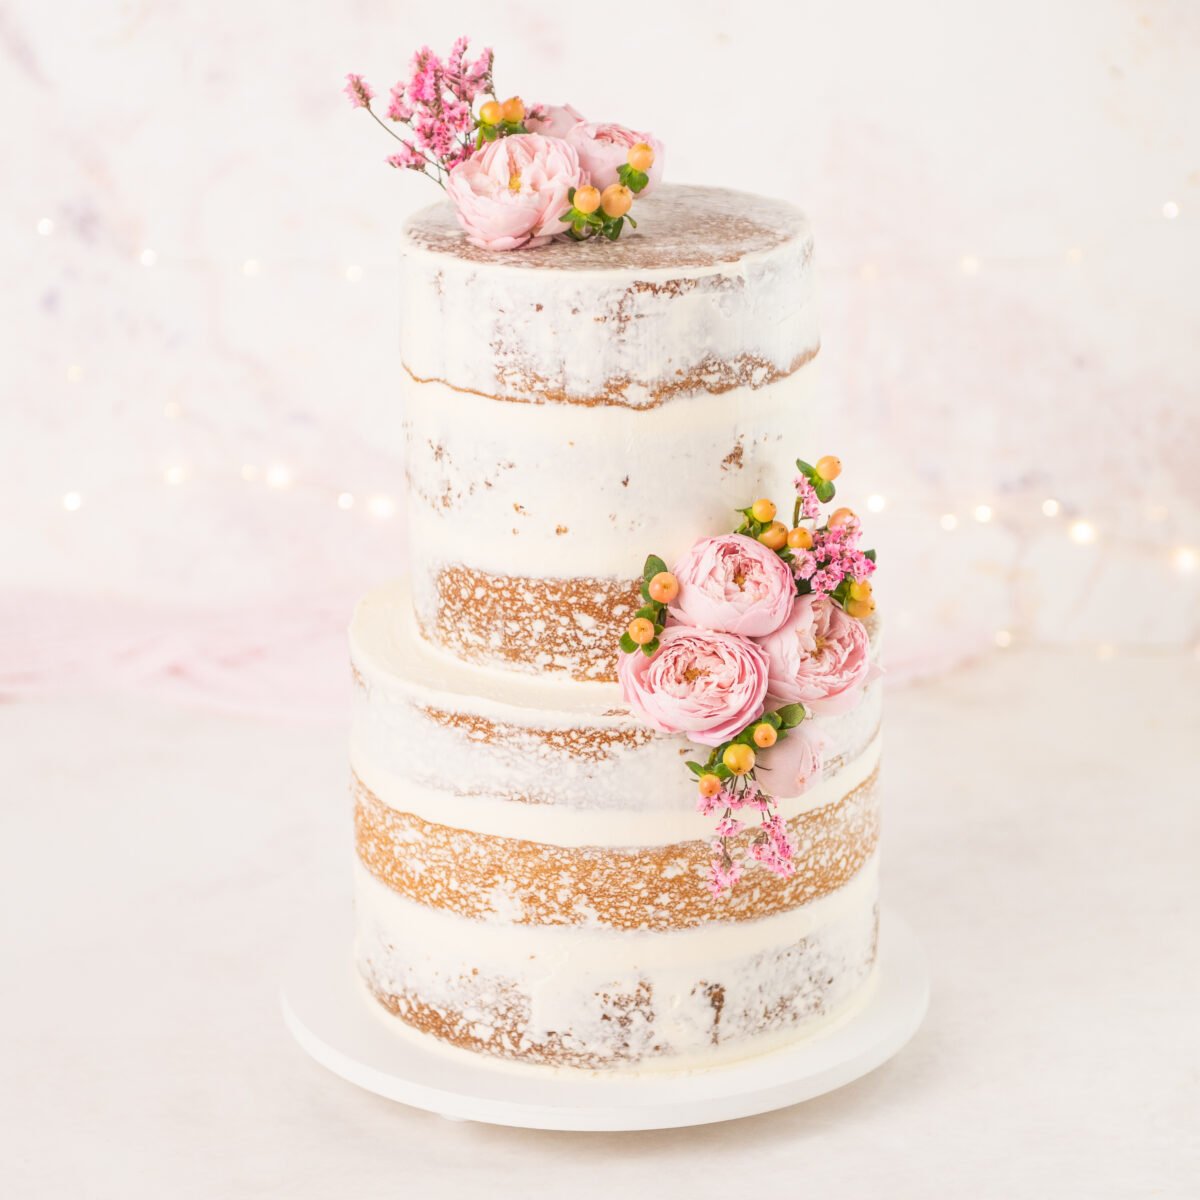 Naked Wedding Cake (the complete guide) – Sugar Geek Show